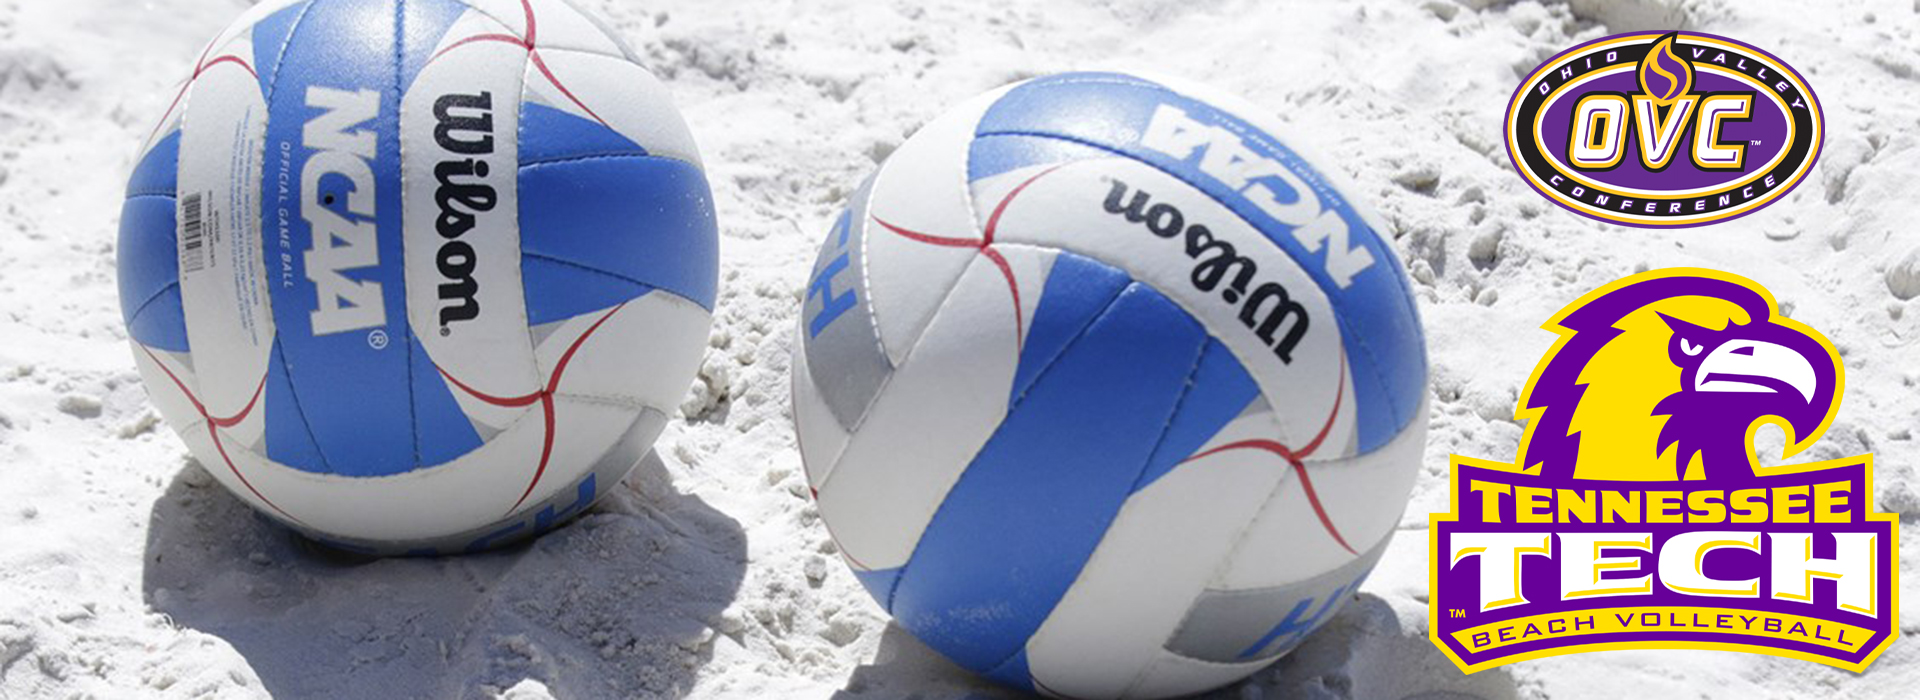 Tennessee Tech adds beach volleyball for 2023 spring season